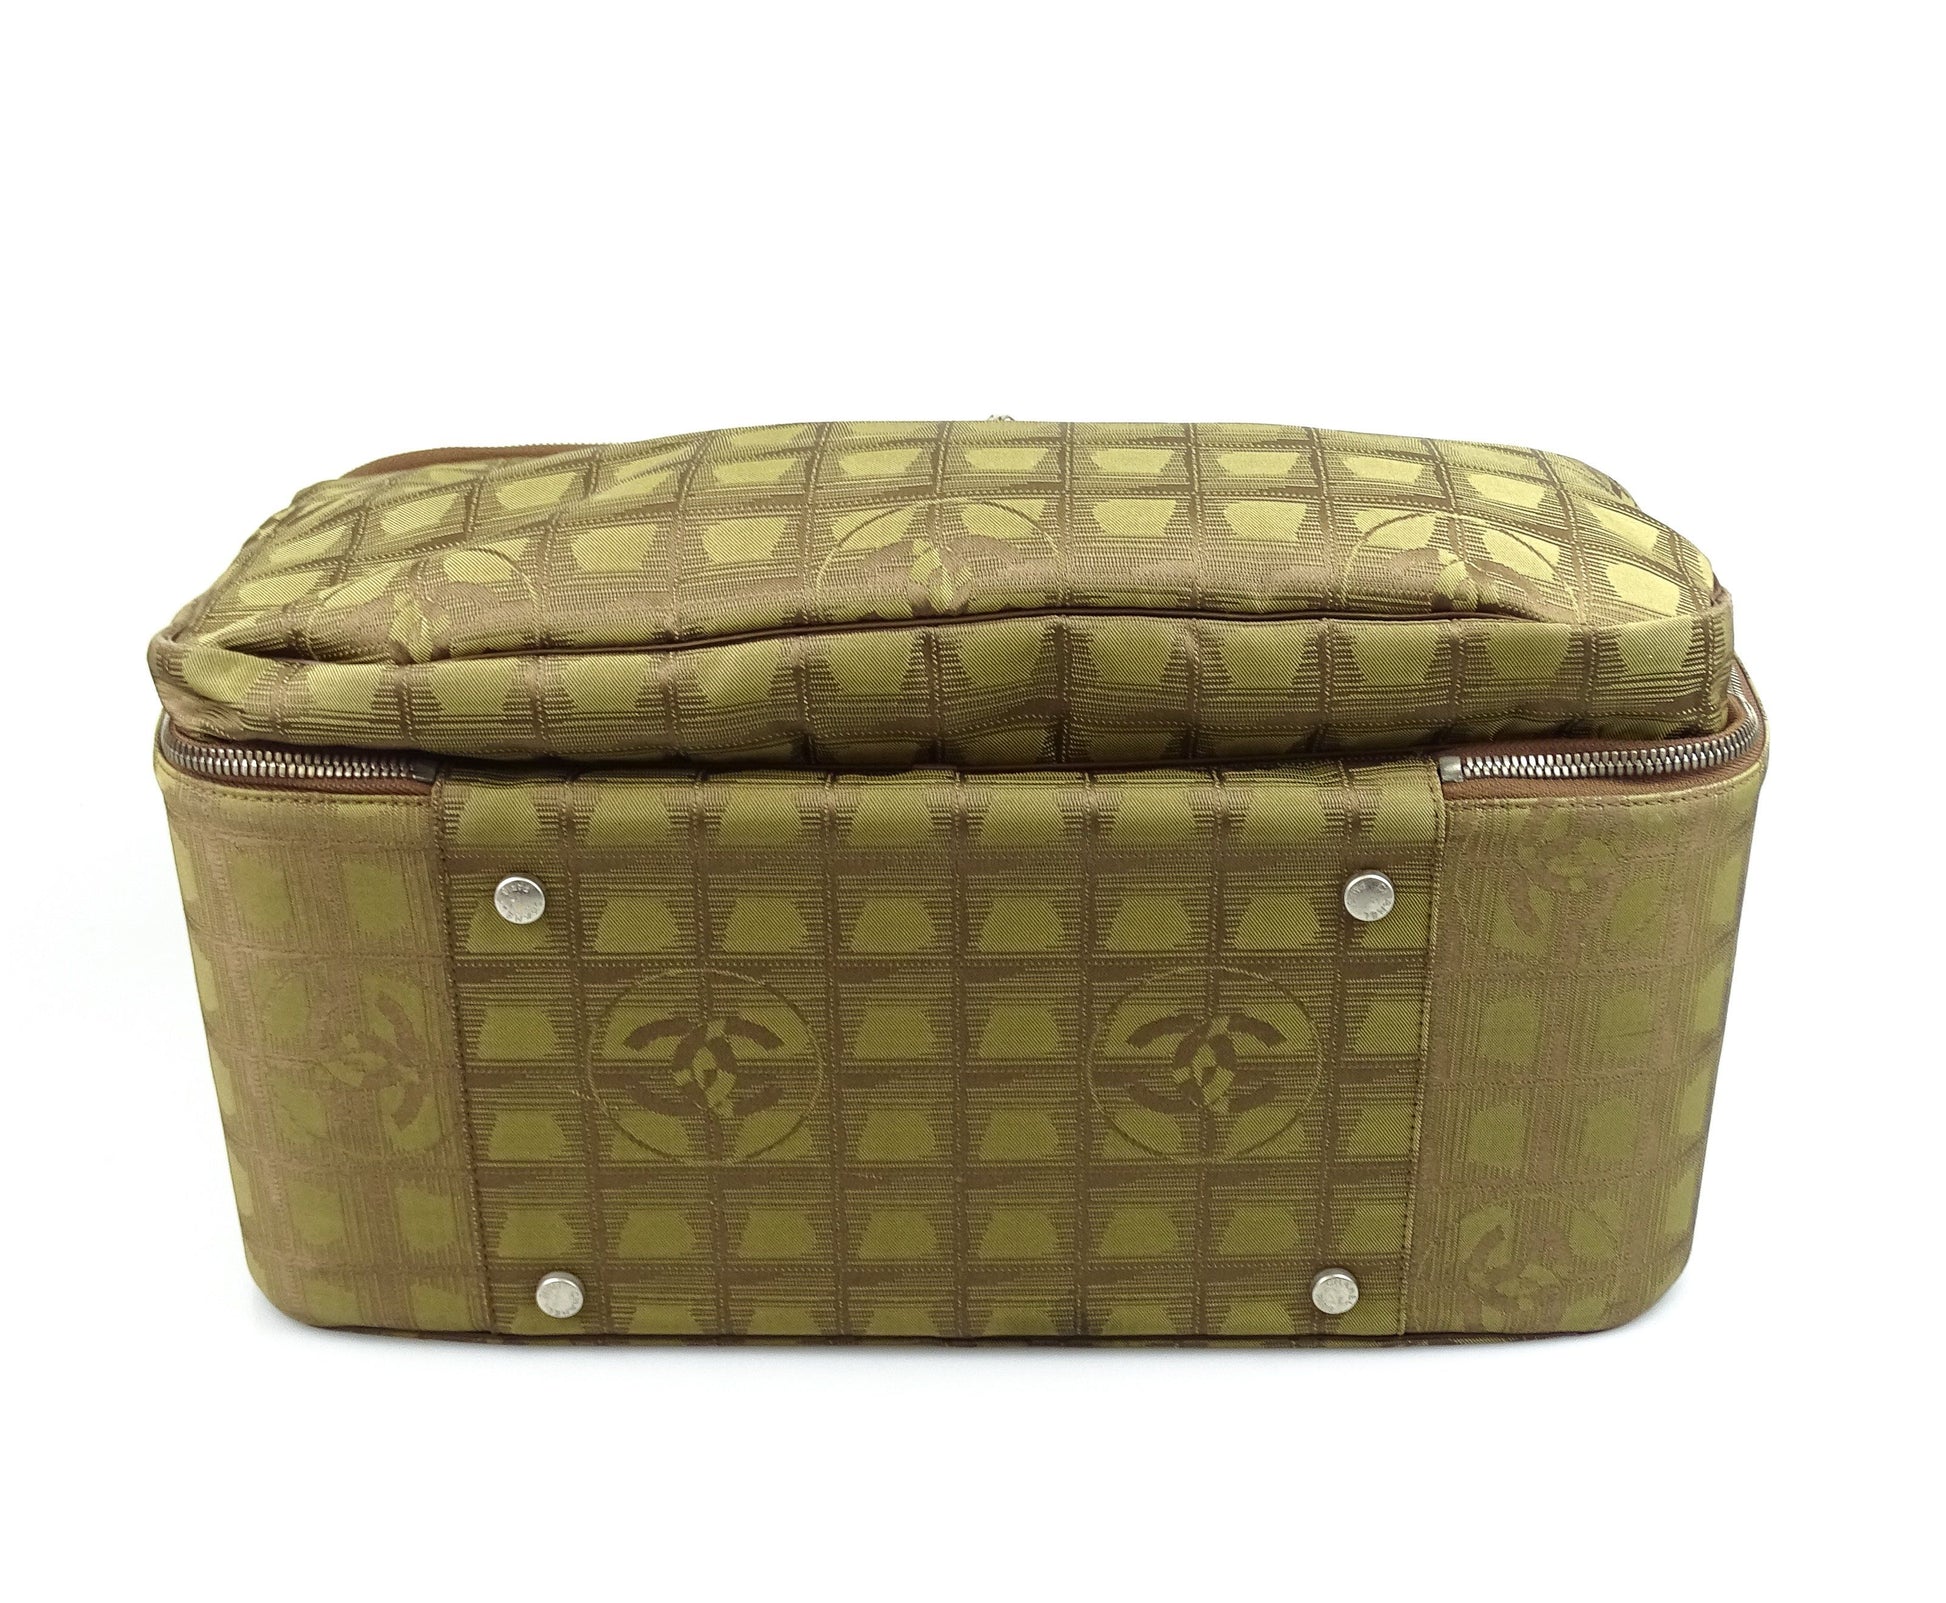 Chanel Travel Line Green Fabric Business/Leisure Trolley Bag 03 Bags Chanel 